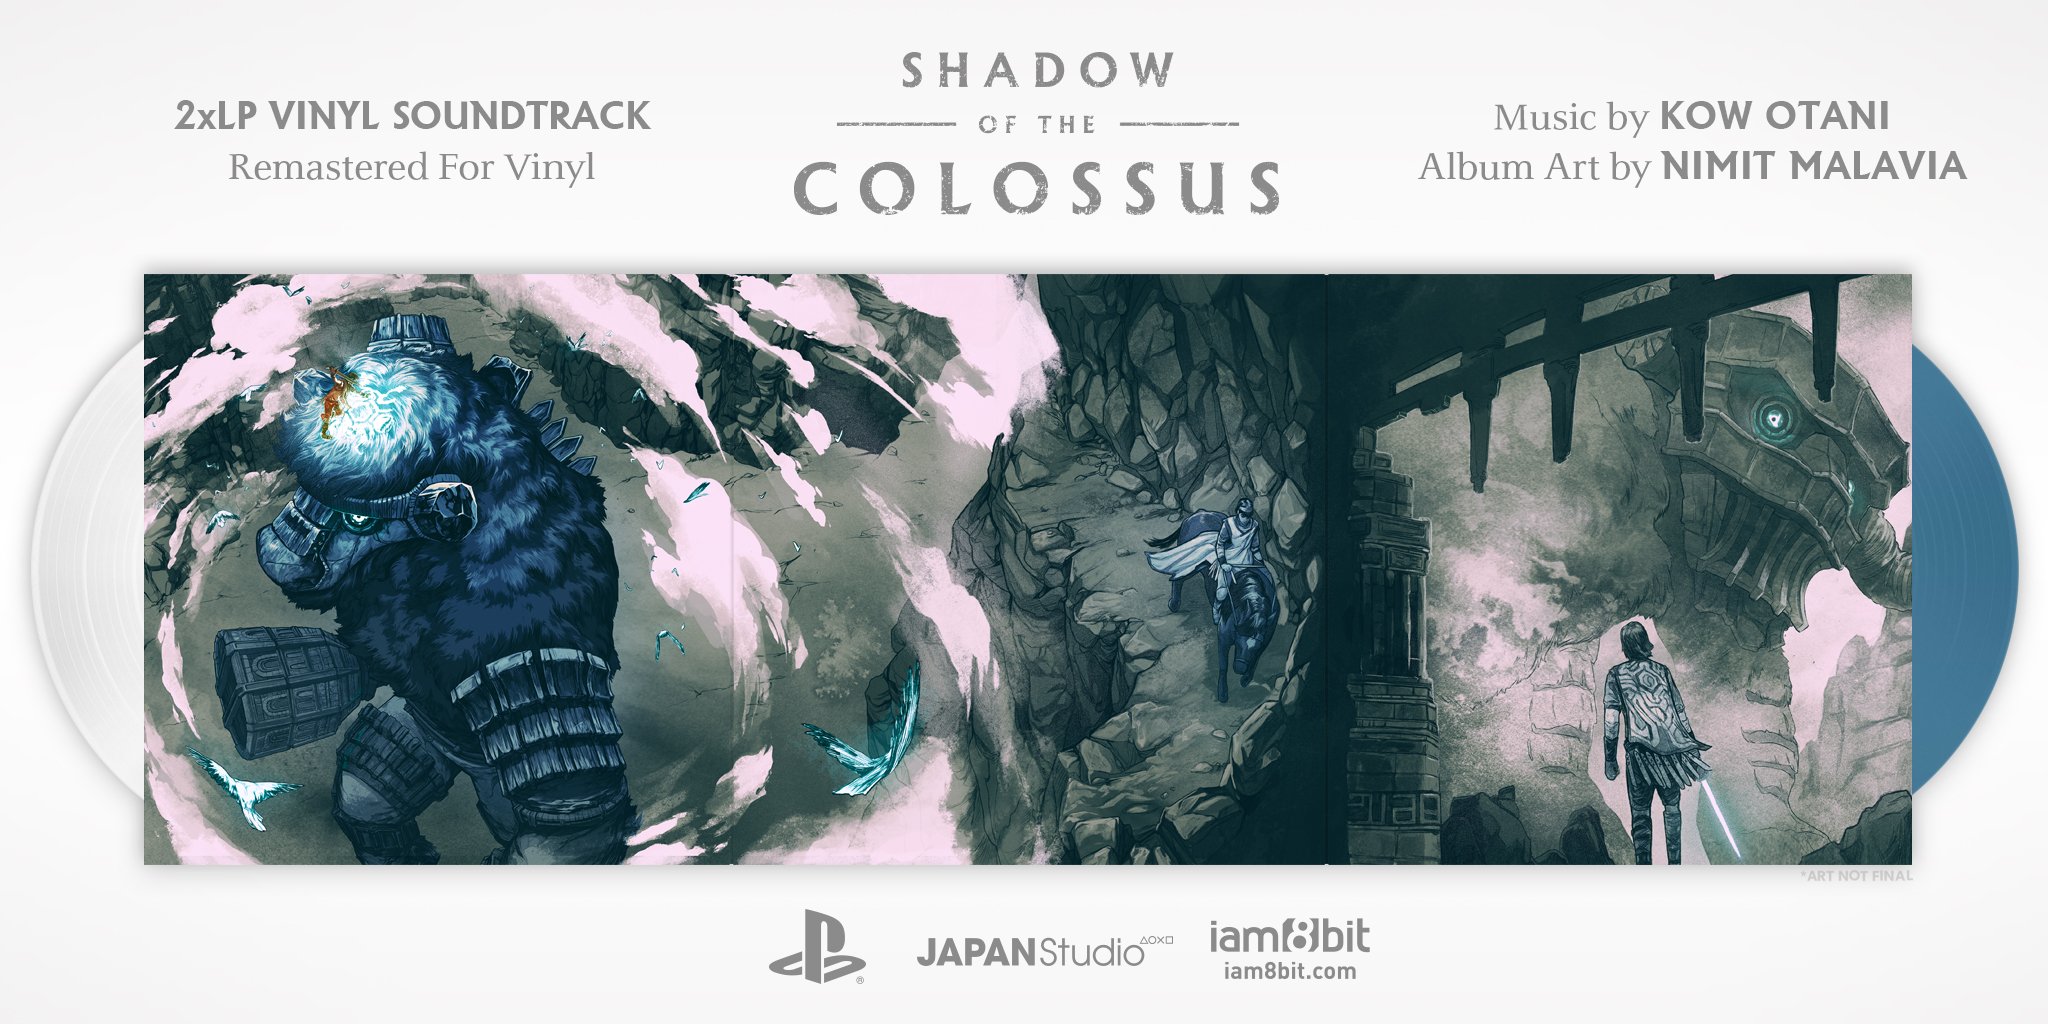 shadow of the colossus vinyl